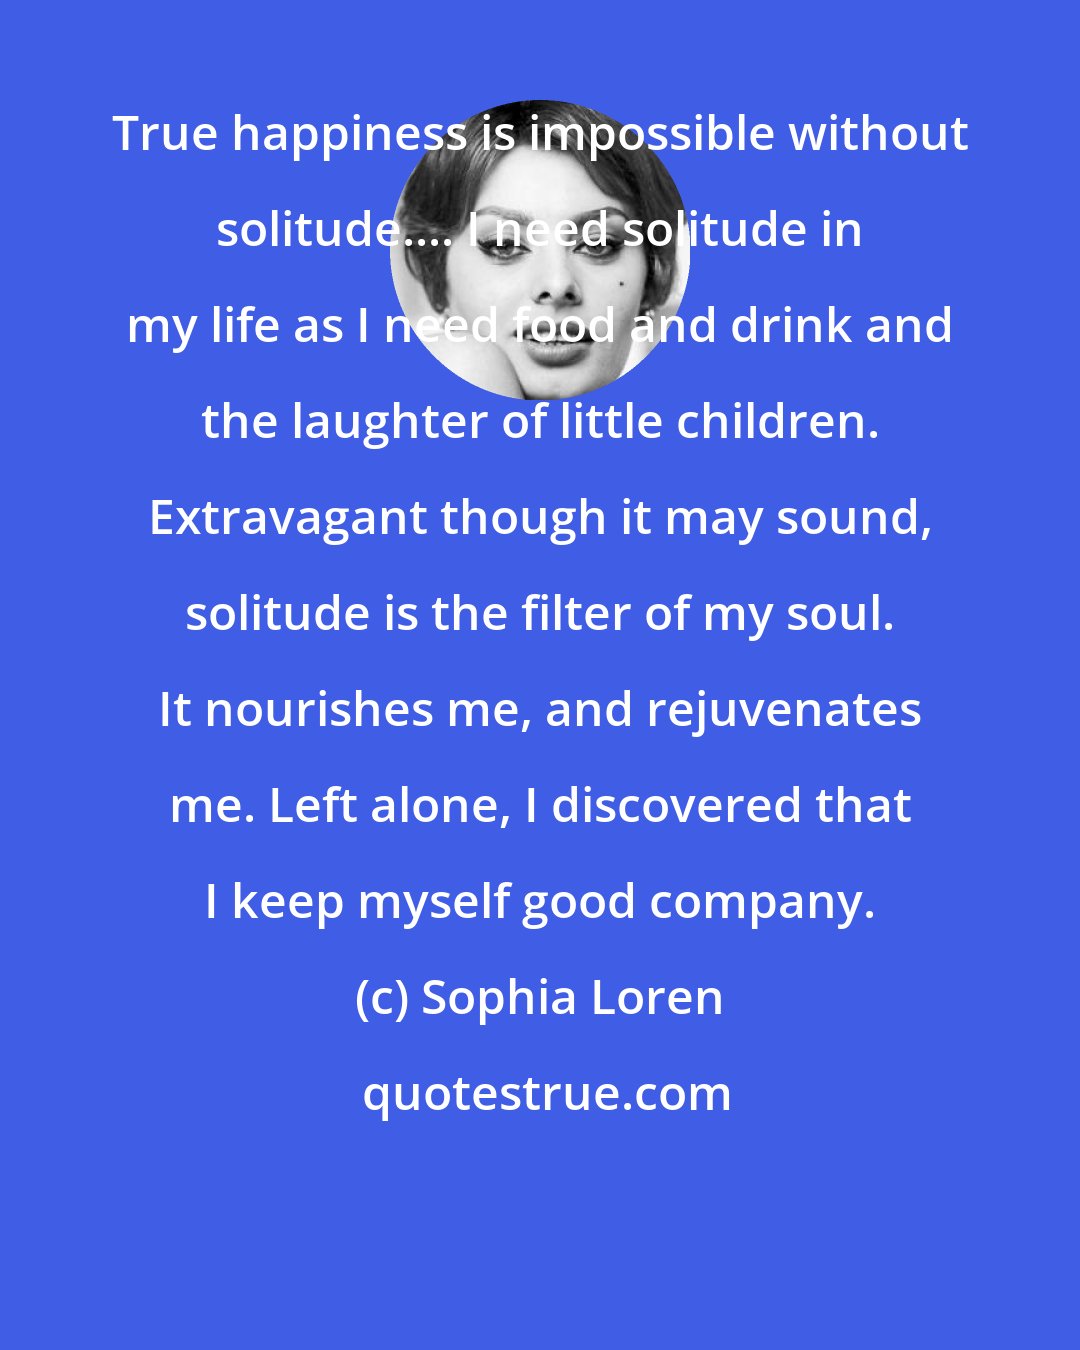 Sophia Loren: True happiness is impossible without solitude.... I need solitude in my life as I need food and drink and the laughter of little children. Extravagant though it may sound, solitude is the filter of my soul. It nourishes me, and rejuvenates me. Left alone, I discovered that I keep myself good company.